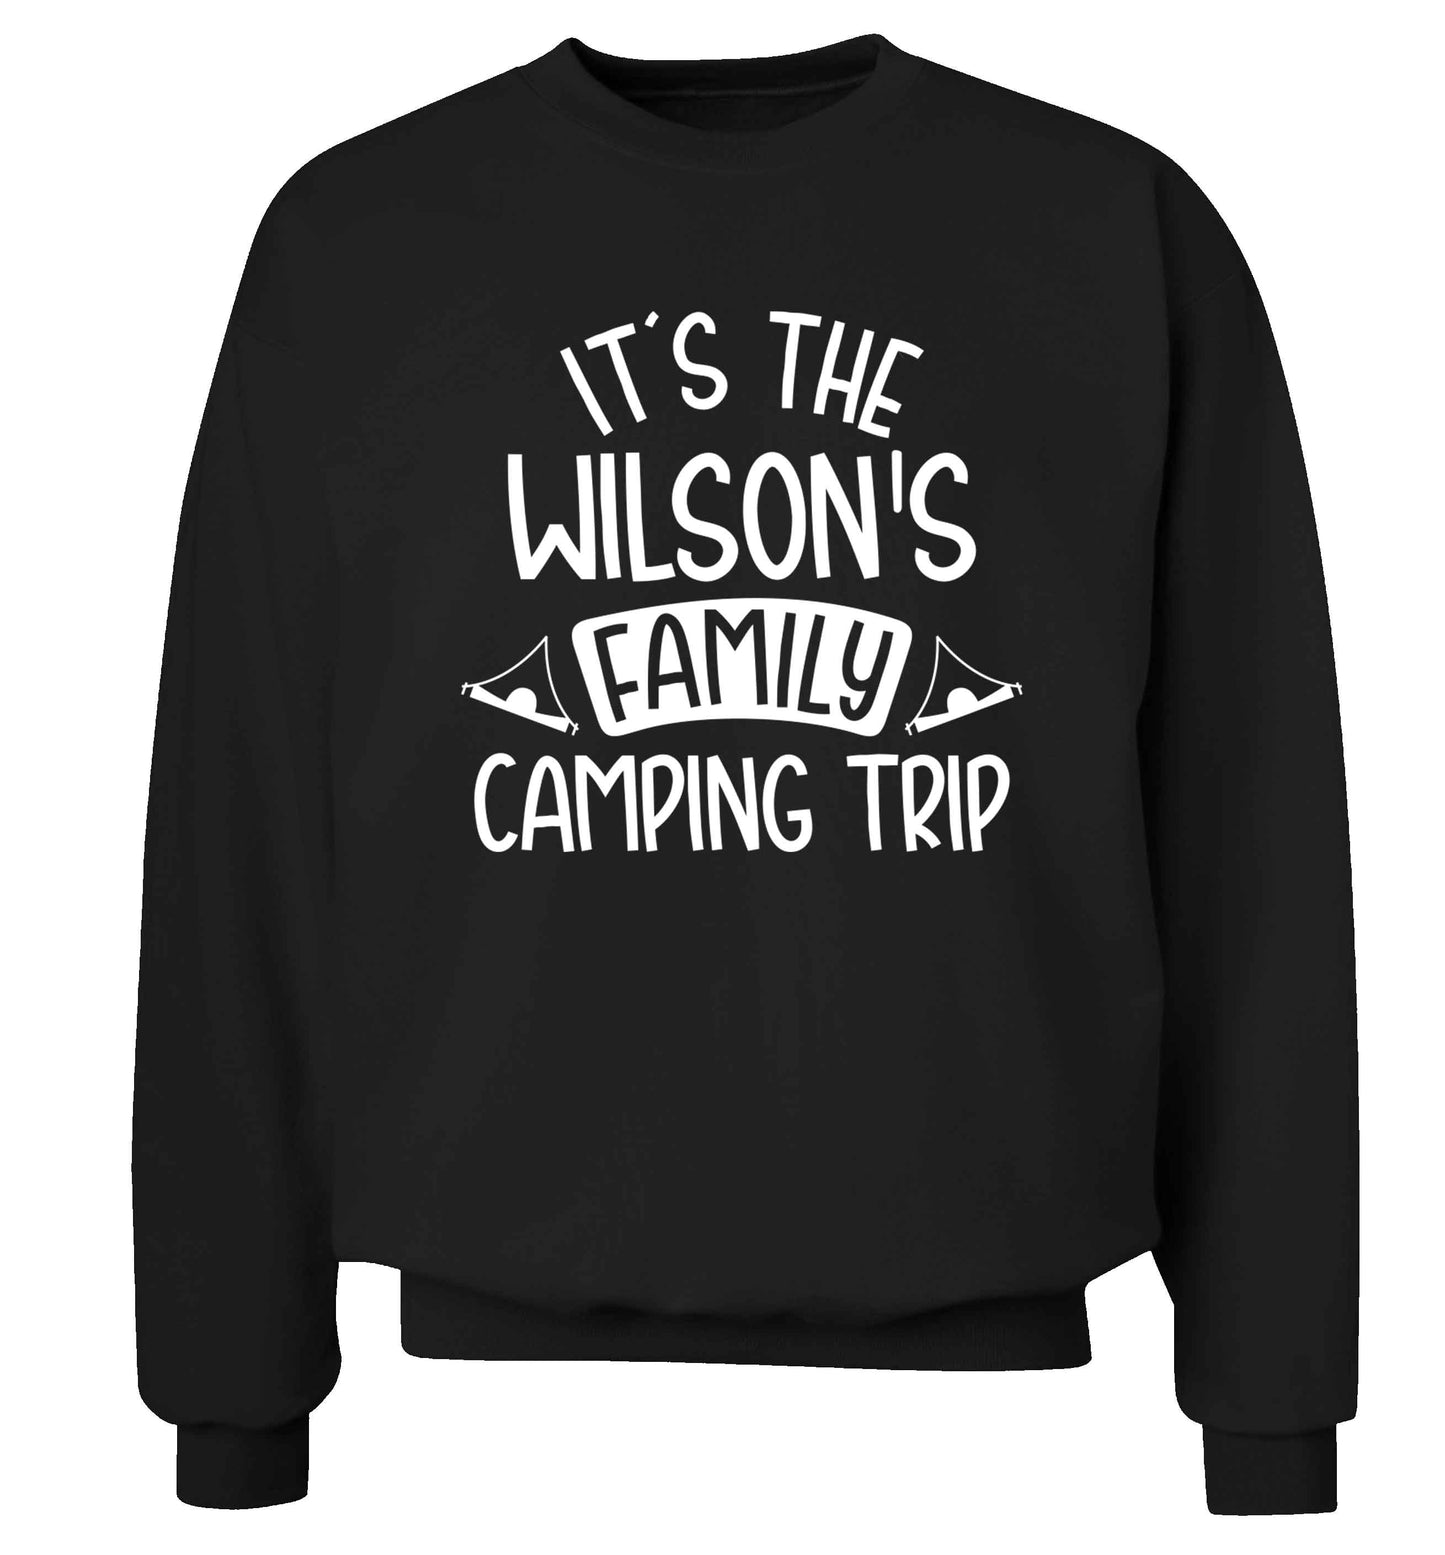 It's the Wilson's family camping trip personalised Adult's unisex black Sweater 2XL